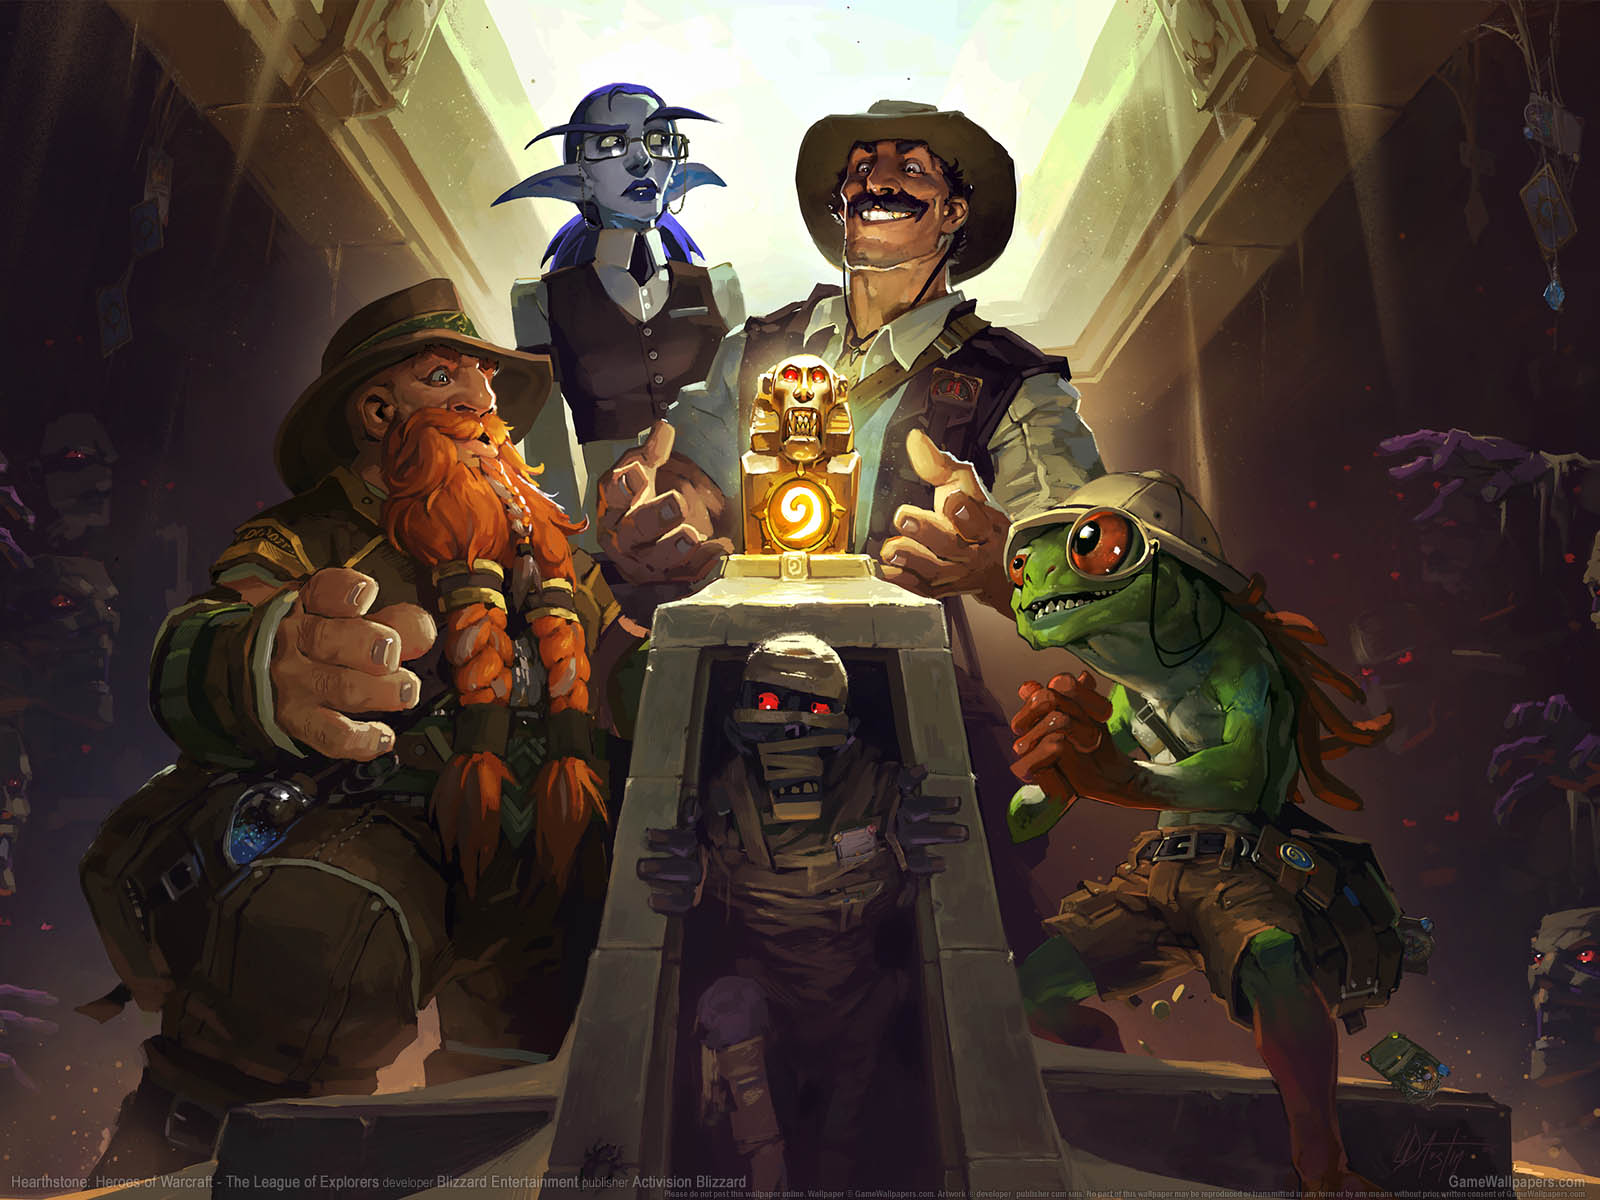 Hearthstone%2525253A Heroes of Warcraft - The League of Explorers fond d'cran 01 1600x1200